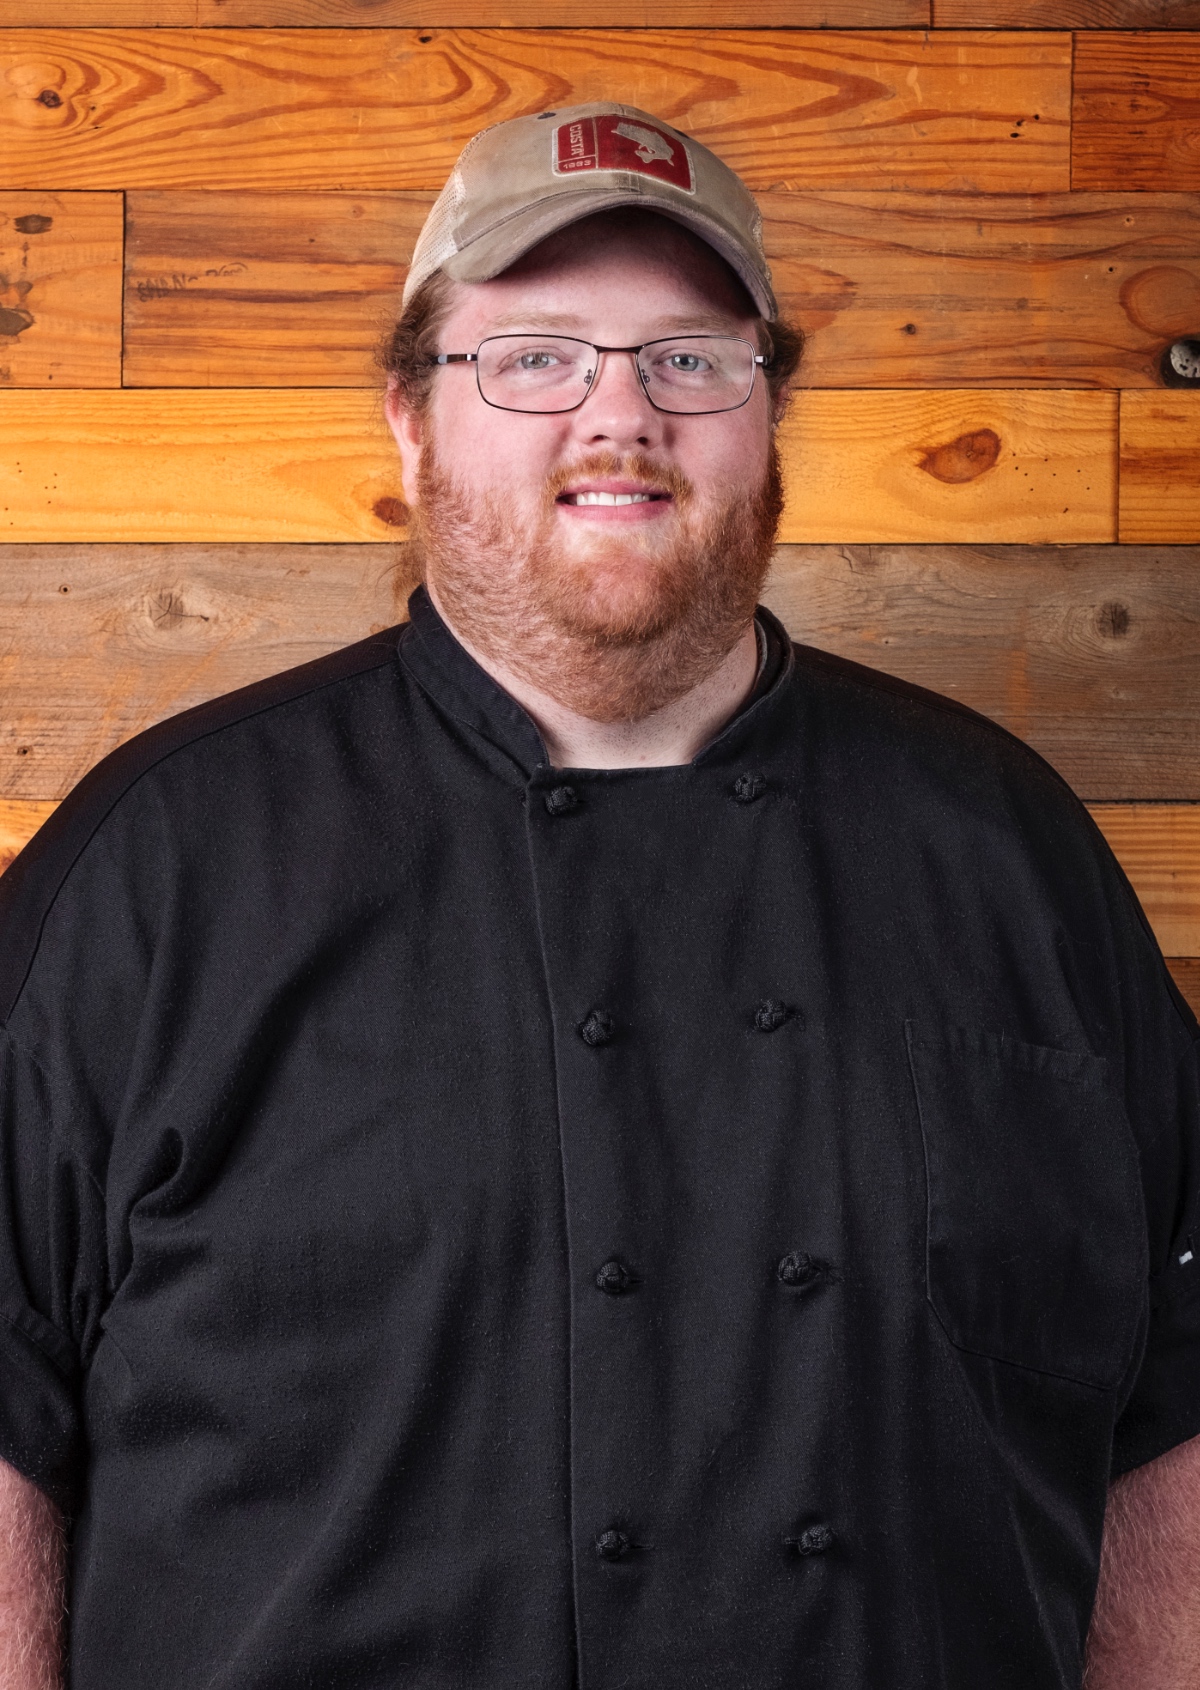 A photo of Chef Nick Simon, a chef with red hair who is wearing glasses